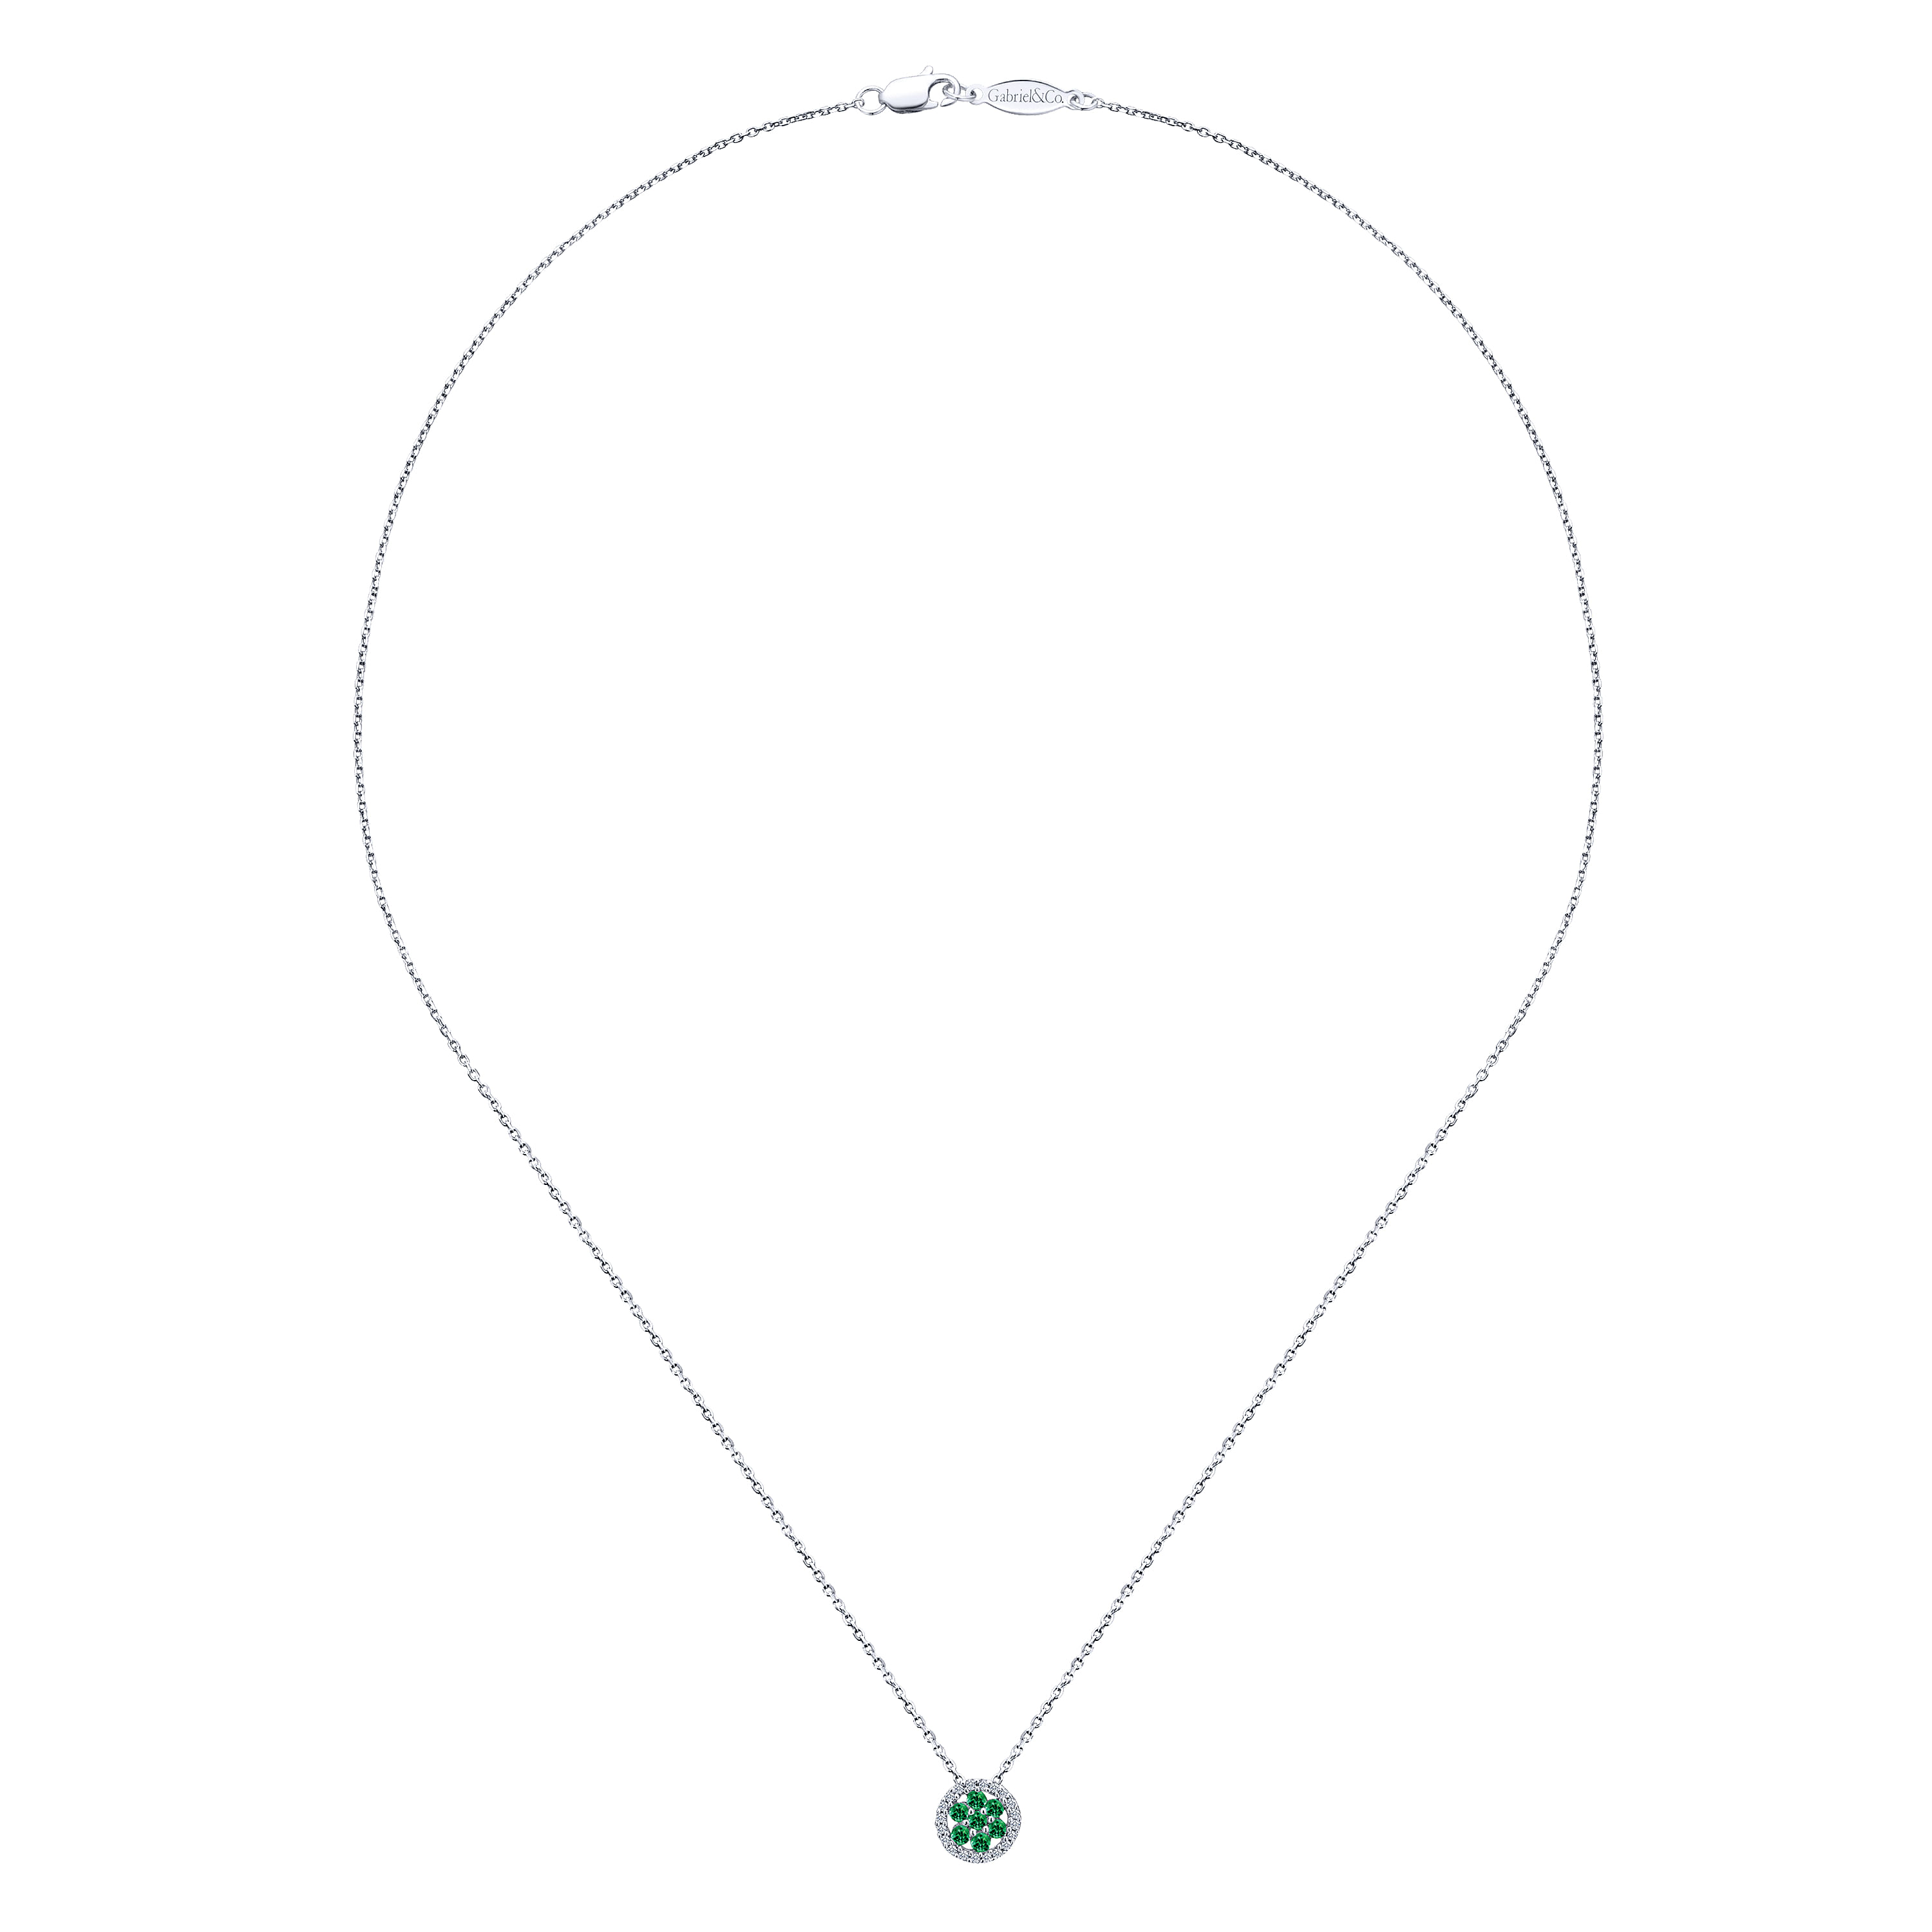 18 inch 14K White Gold Floral Emerald and Diamond Halo Pendant Necklace